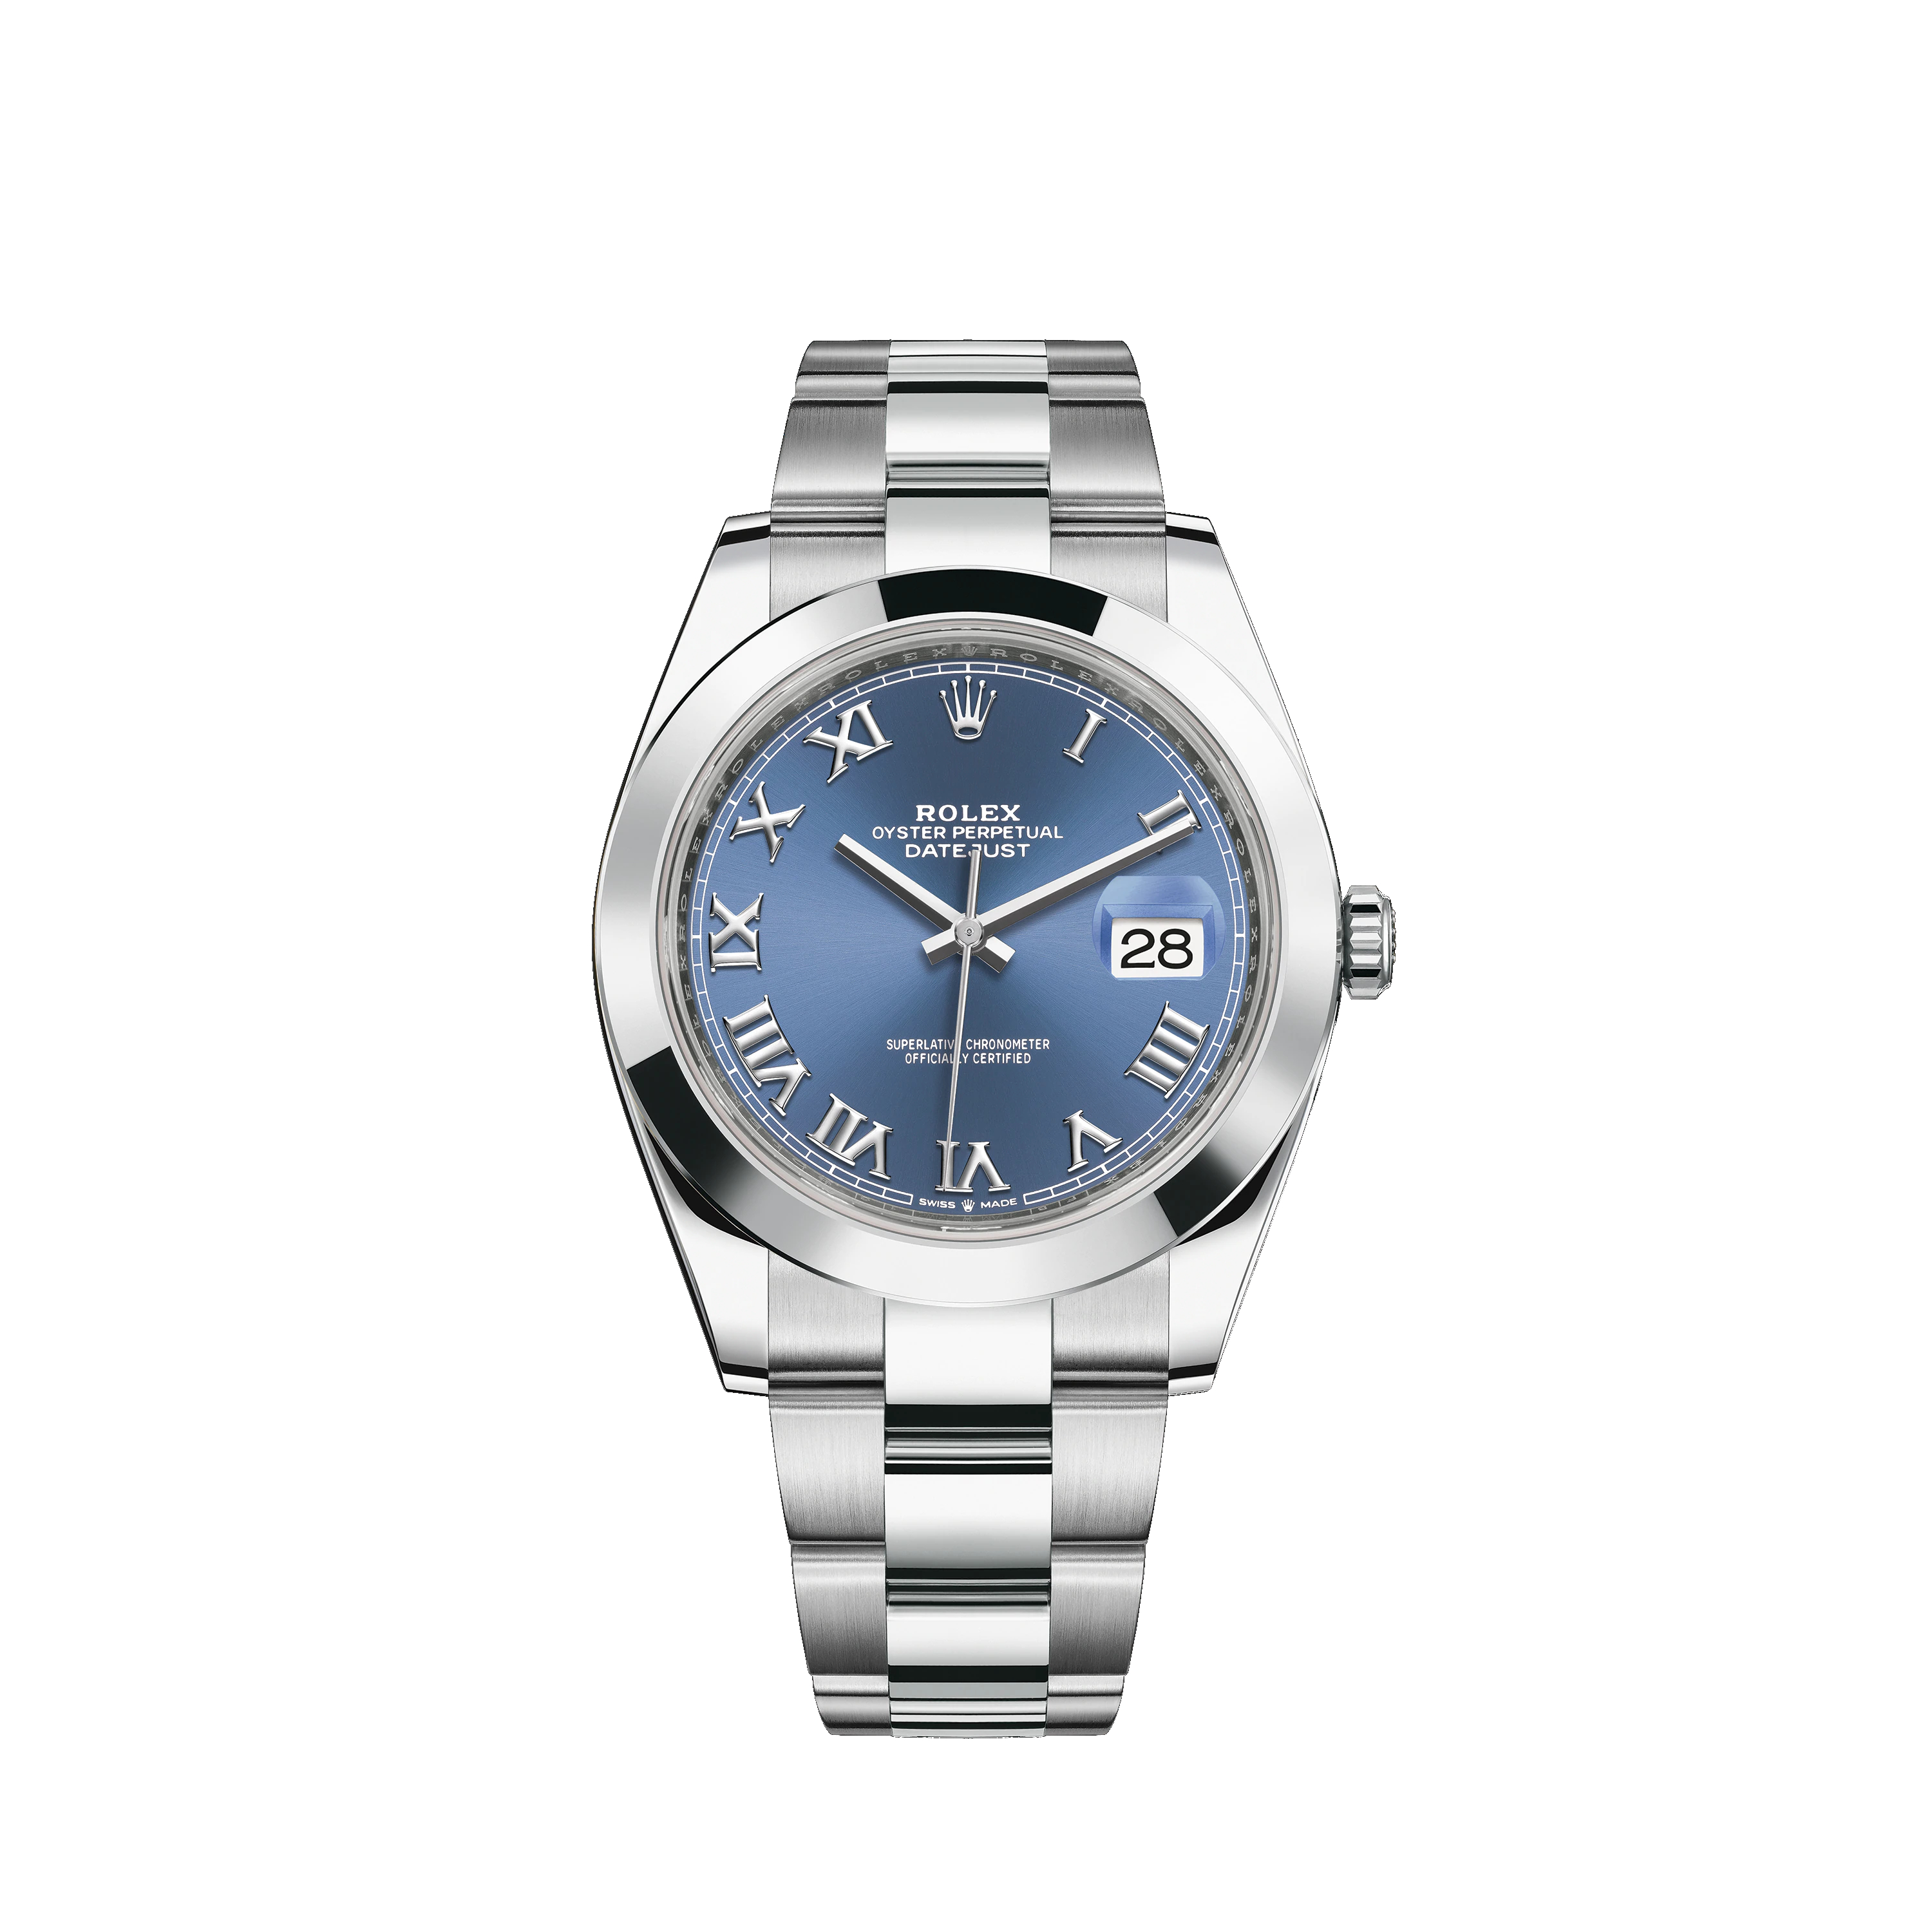 Datejust 41 126300 Stainless Steel Watch (Blue)